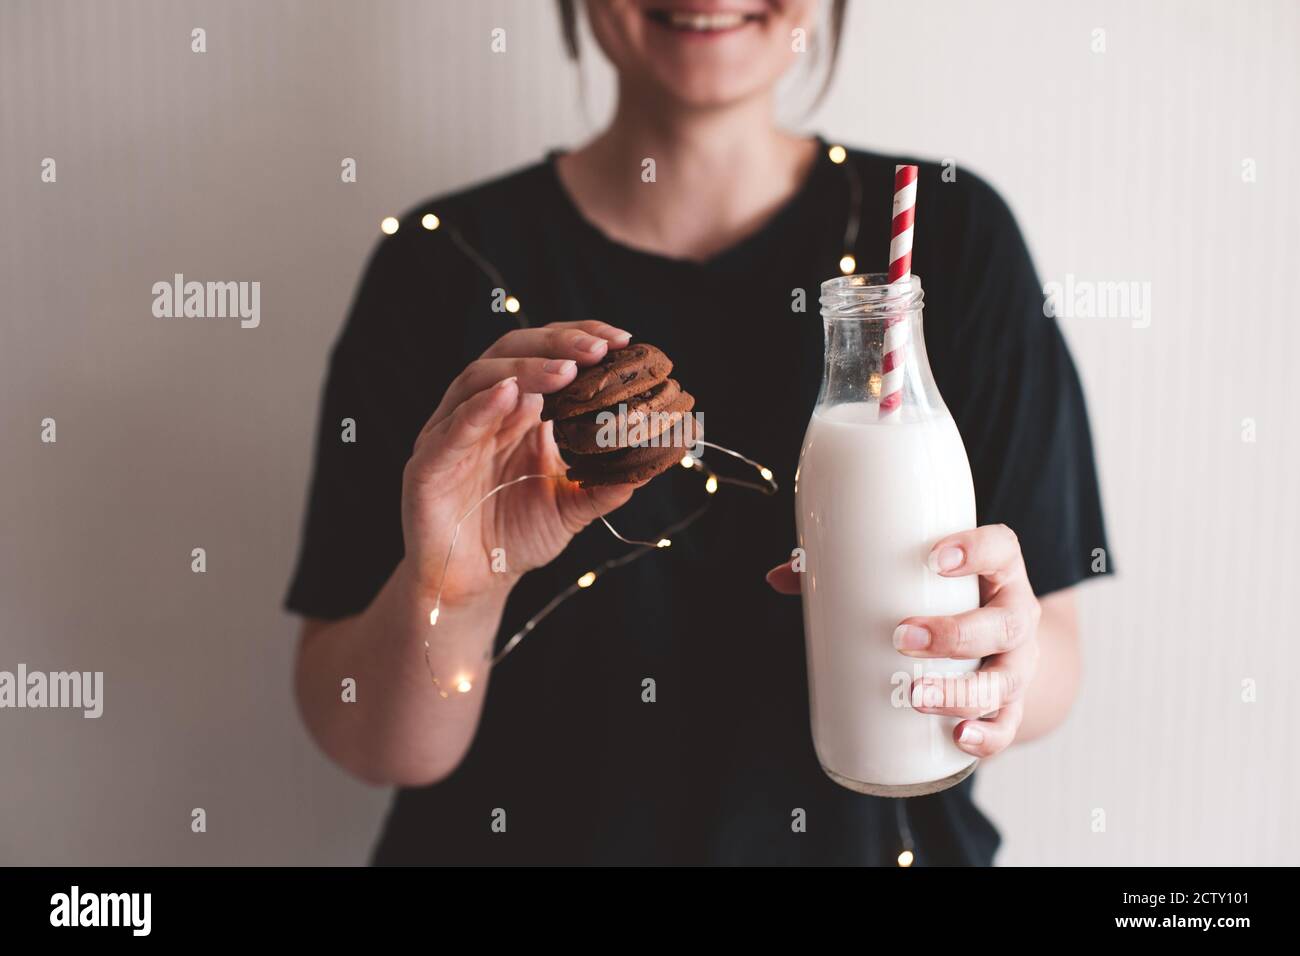 Smiling woman eating chocolate cookies and holding bottle of milk in room close up. Winter holiday season. Good morning. Stock Photo